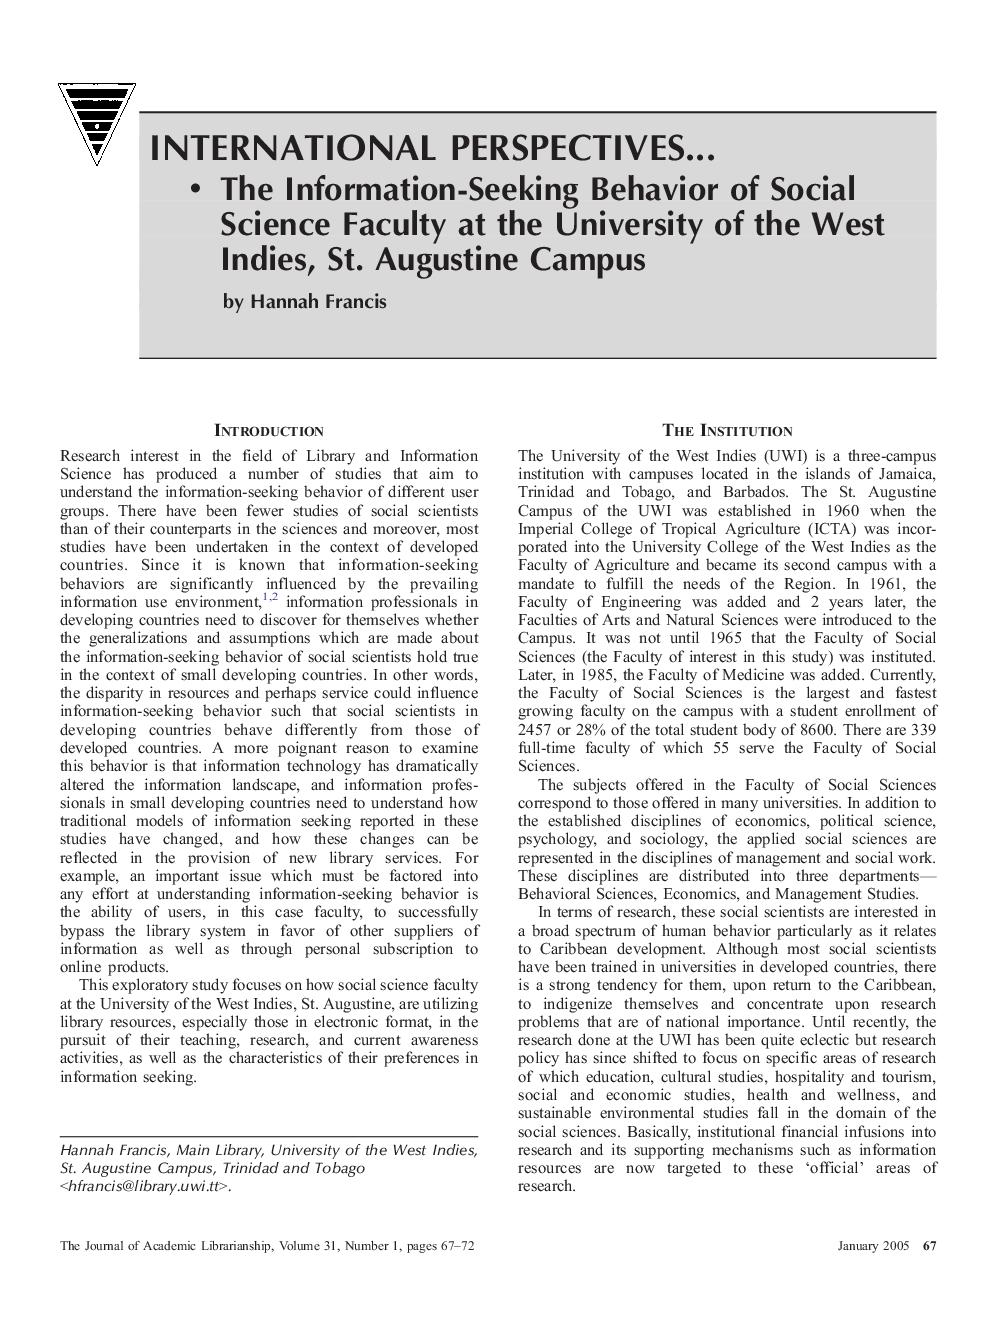 The Information-Seeking Behavior of Social Science Faculty at the University of the West Indies, St. Augustine Campus